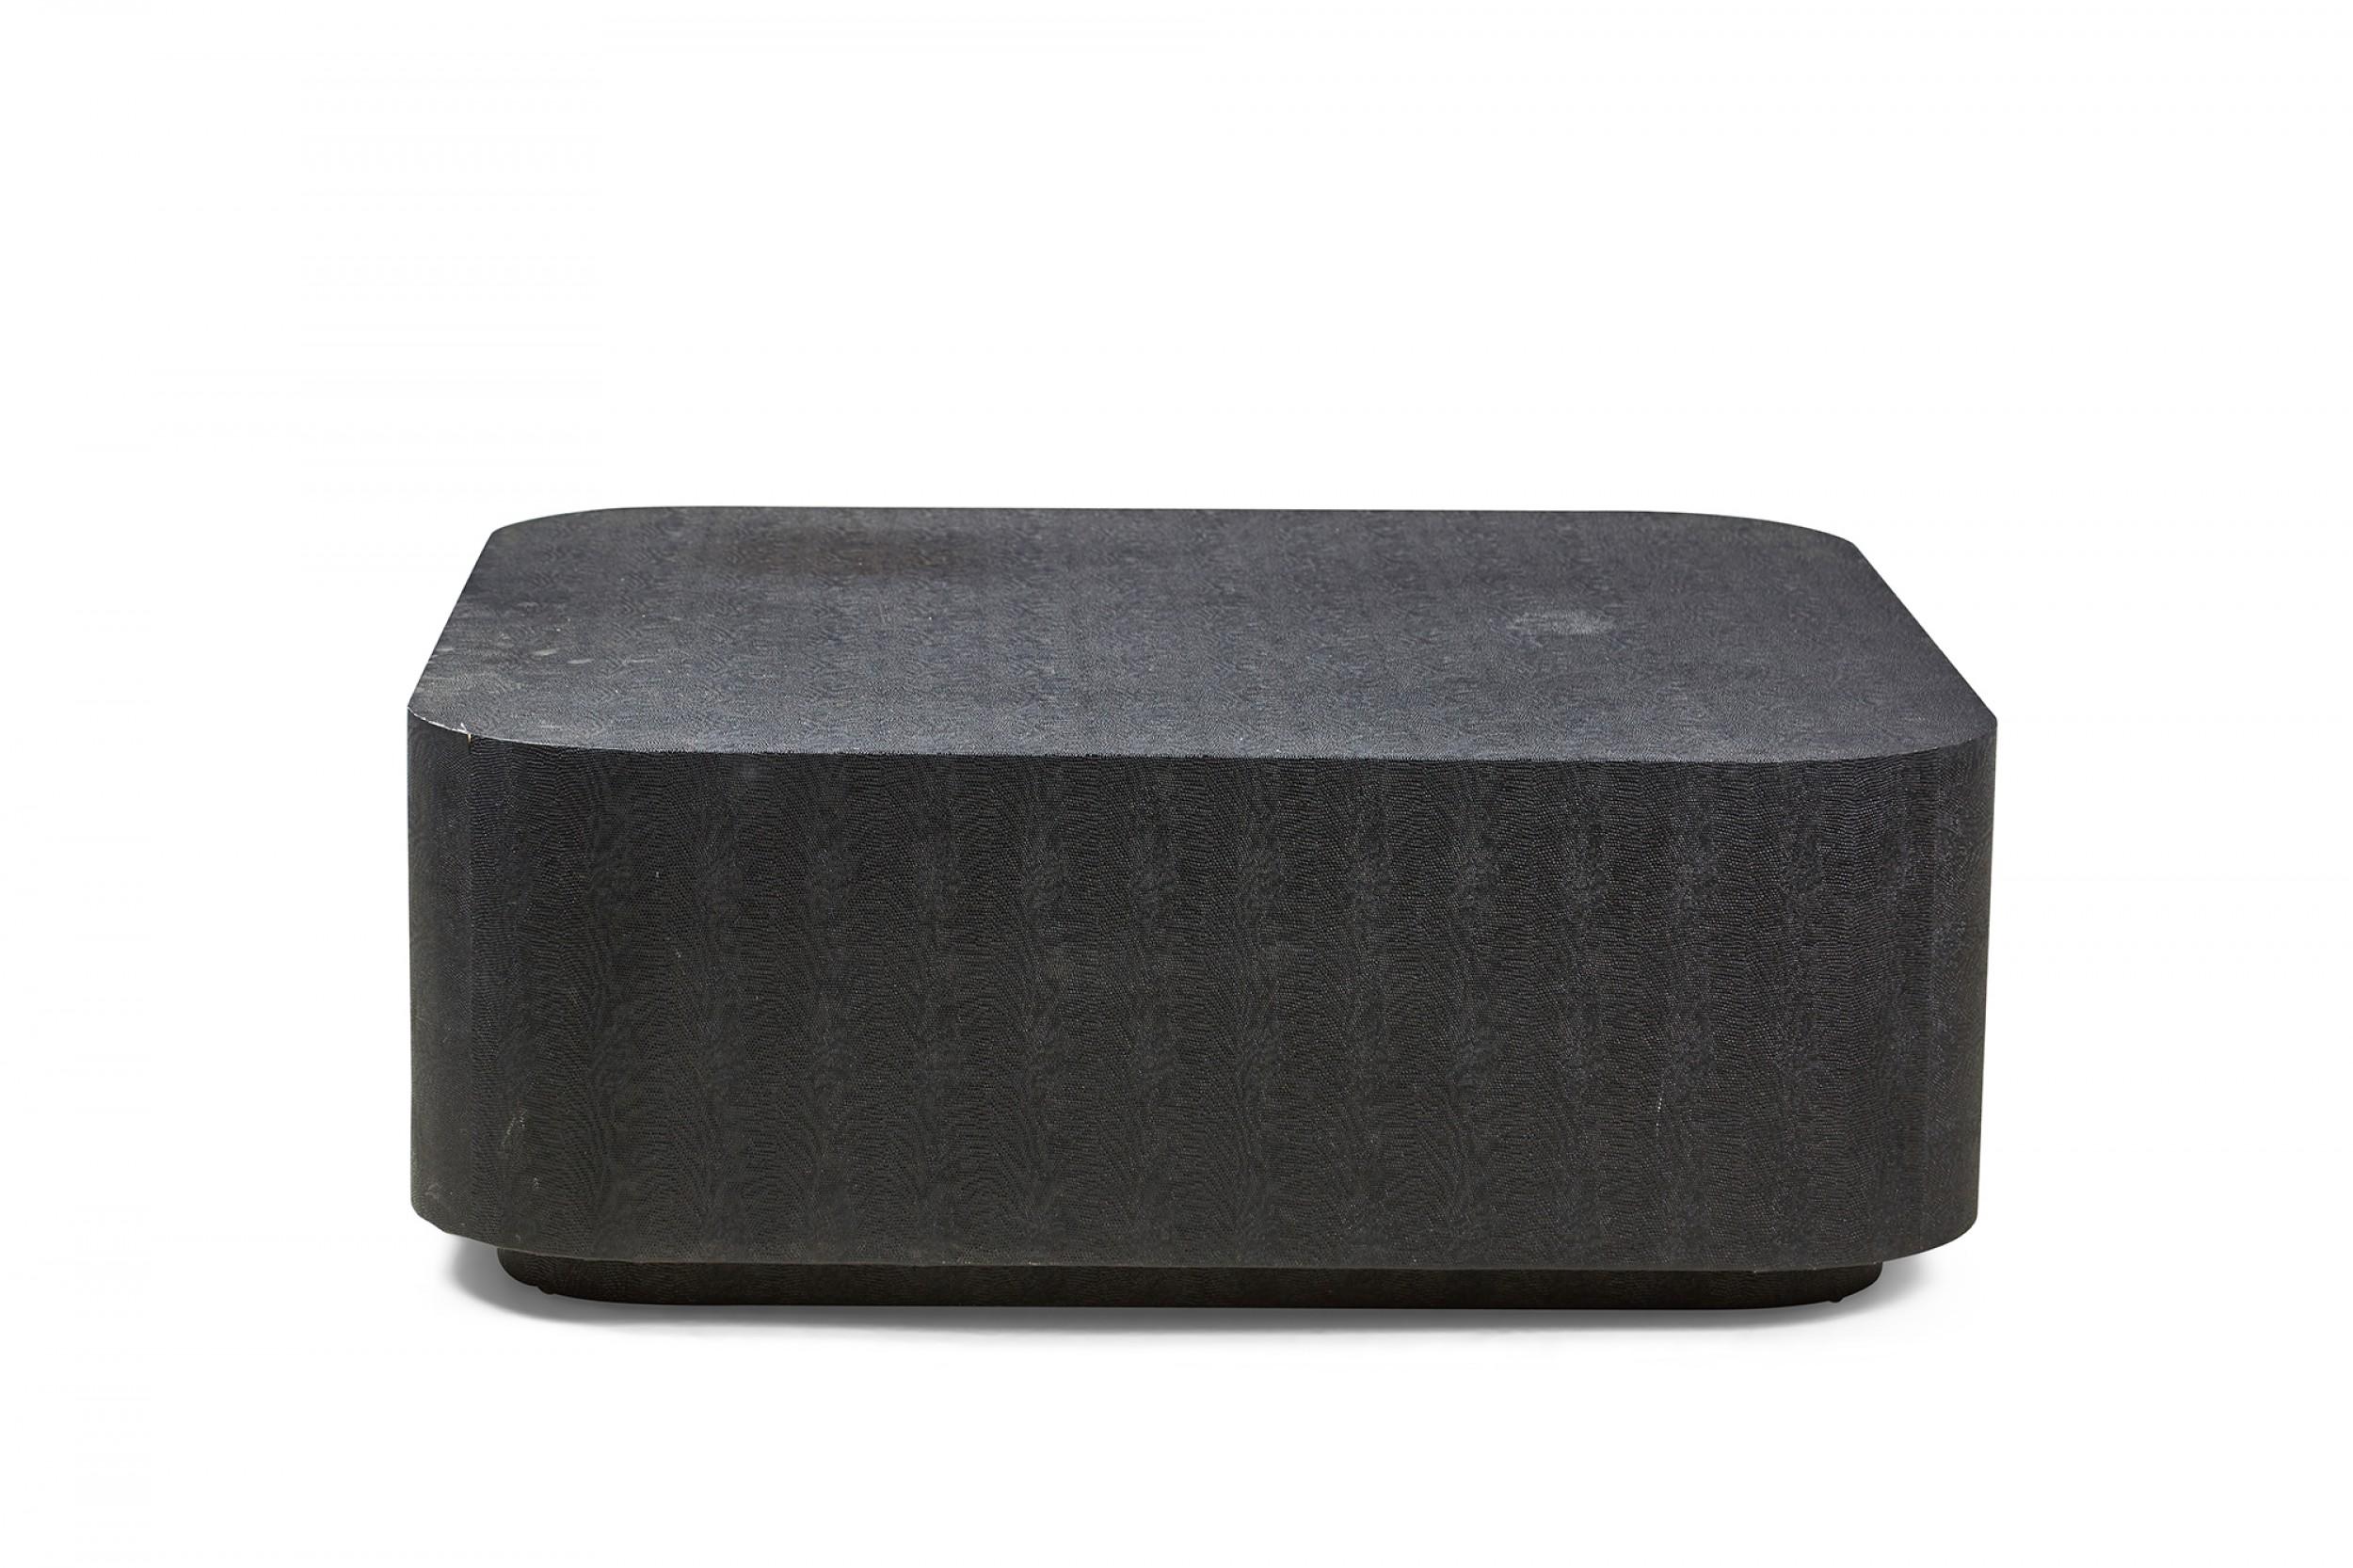 American Mid-Century black faux shagreen wrapped coffee table with a square profile and rounded corners on an inset platform base. (manner of Karl Springer)
